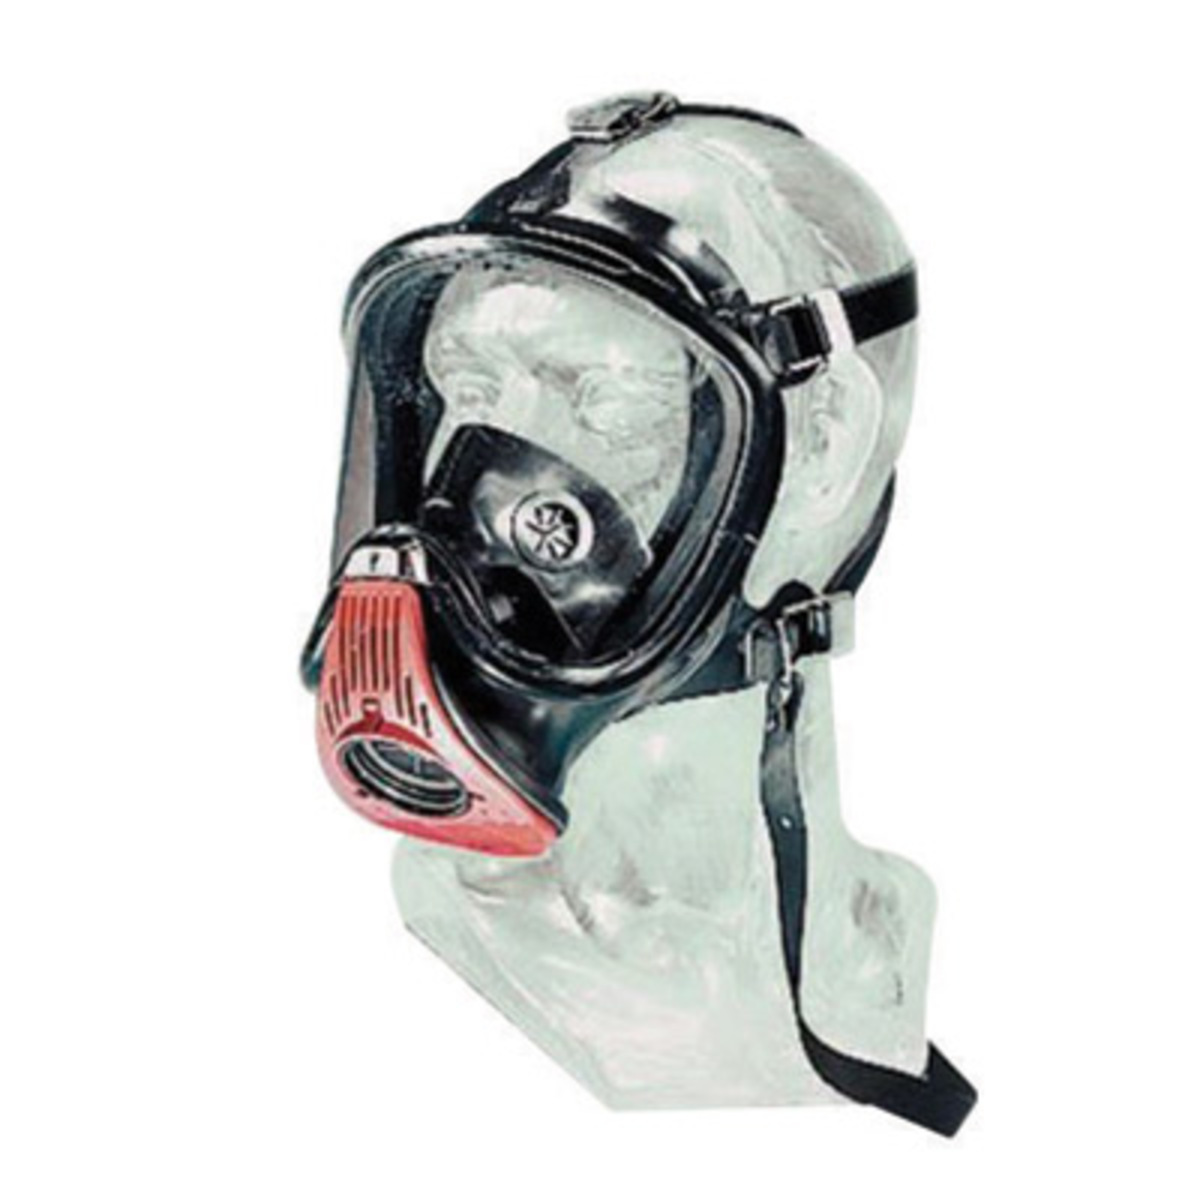 MSA Medium UltraVue Elite™ Series Full Face Air Purifying Respirator (Availability restrictions apply.)